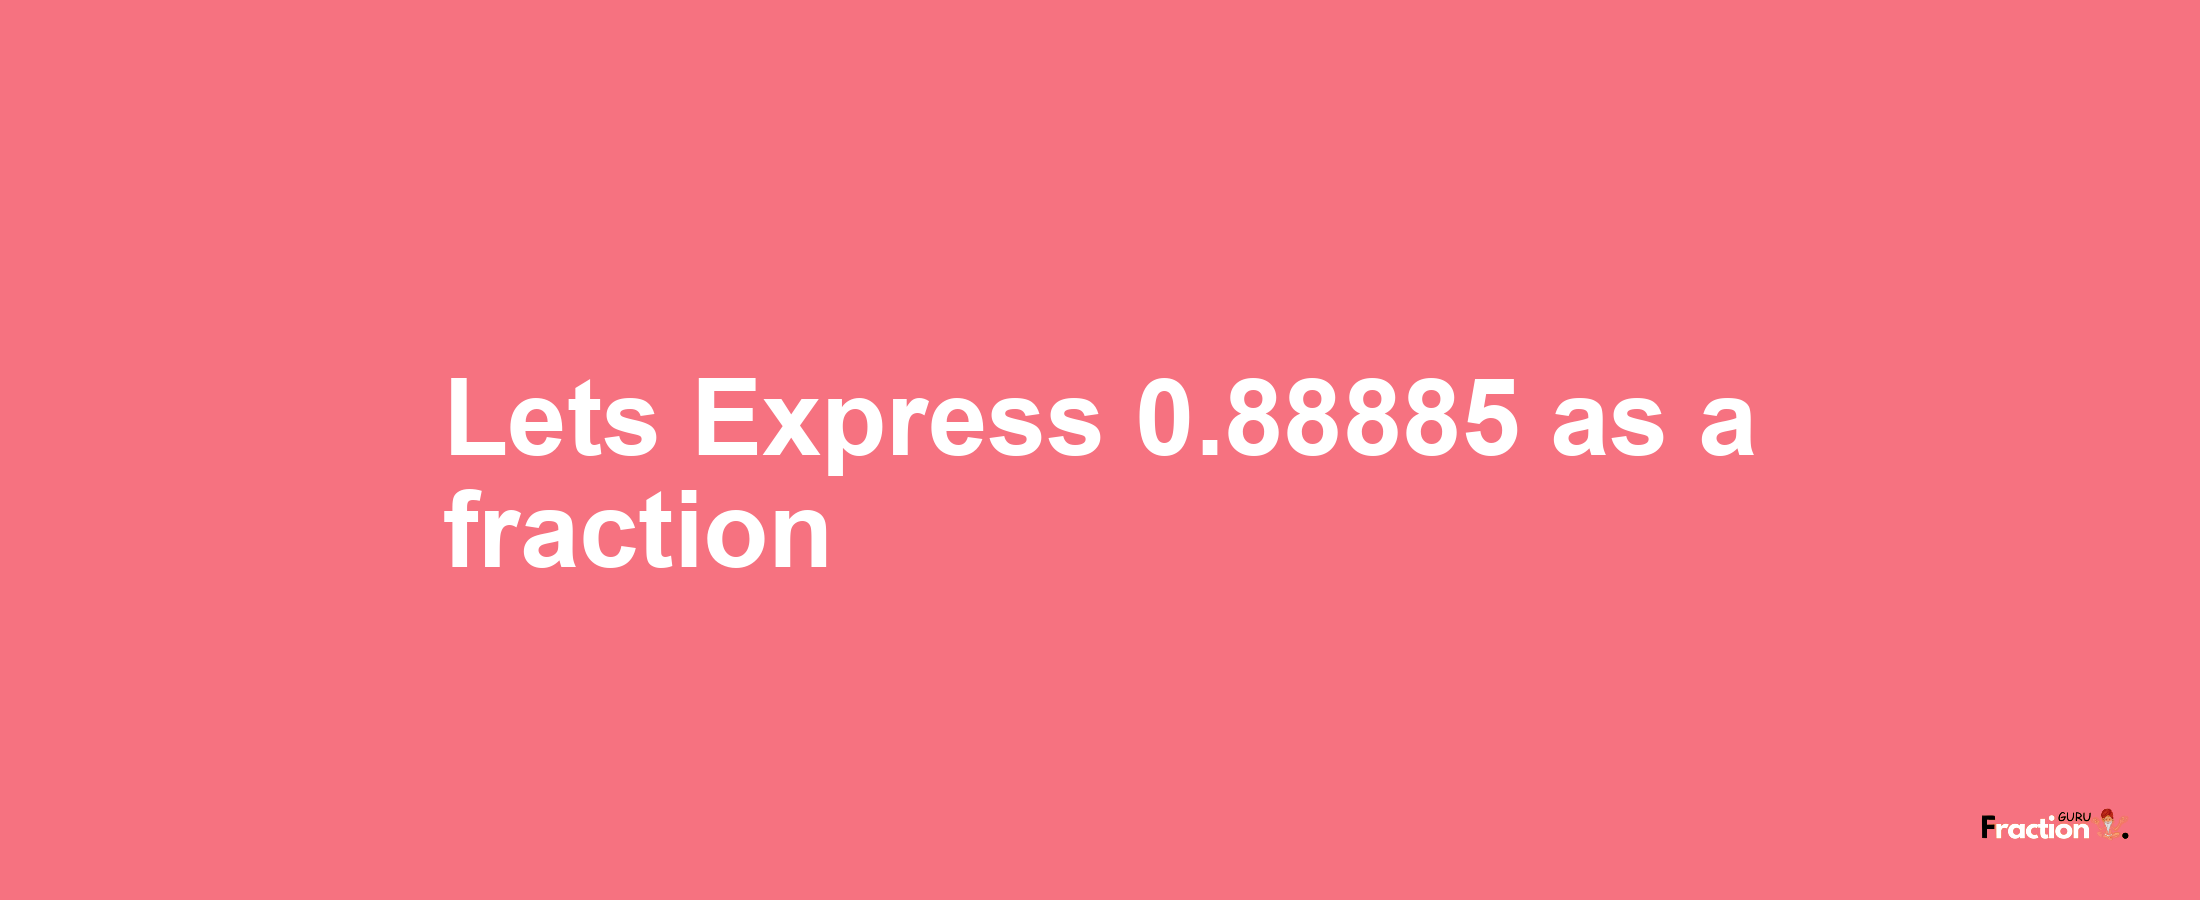 Lets Express 0.88885 as afraction